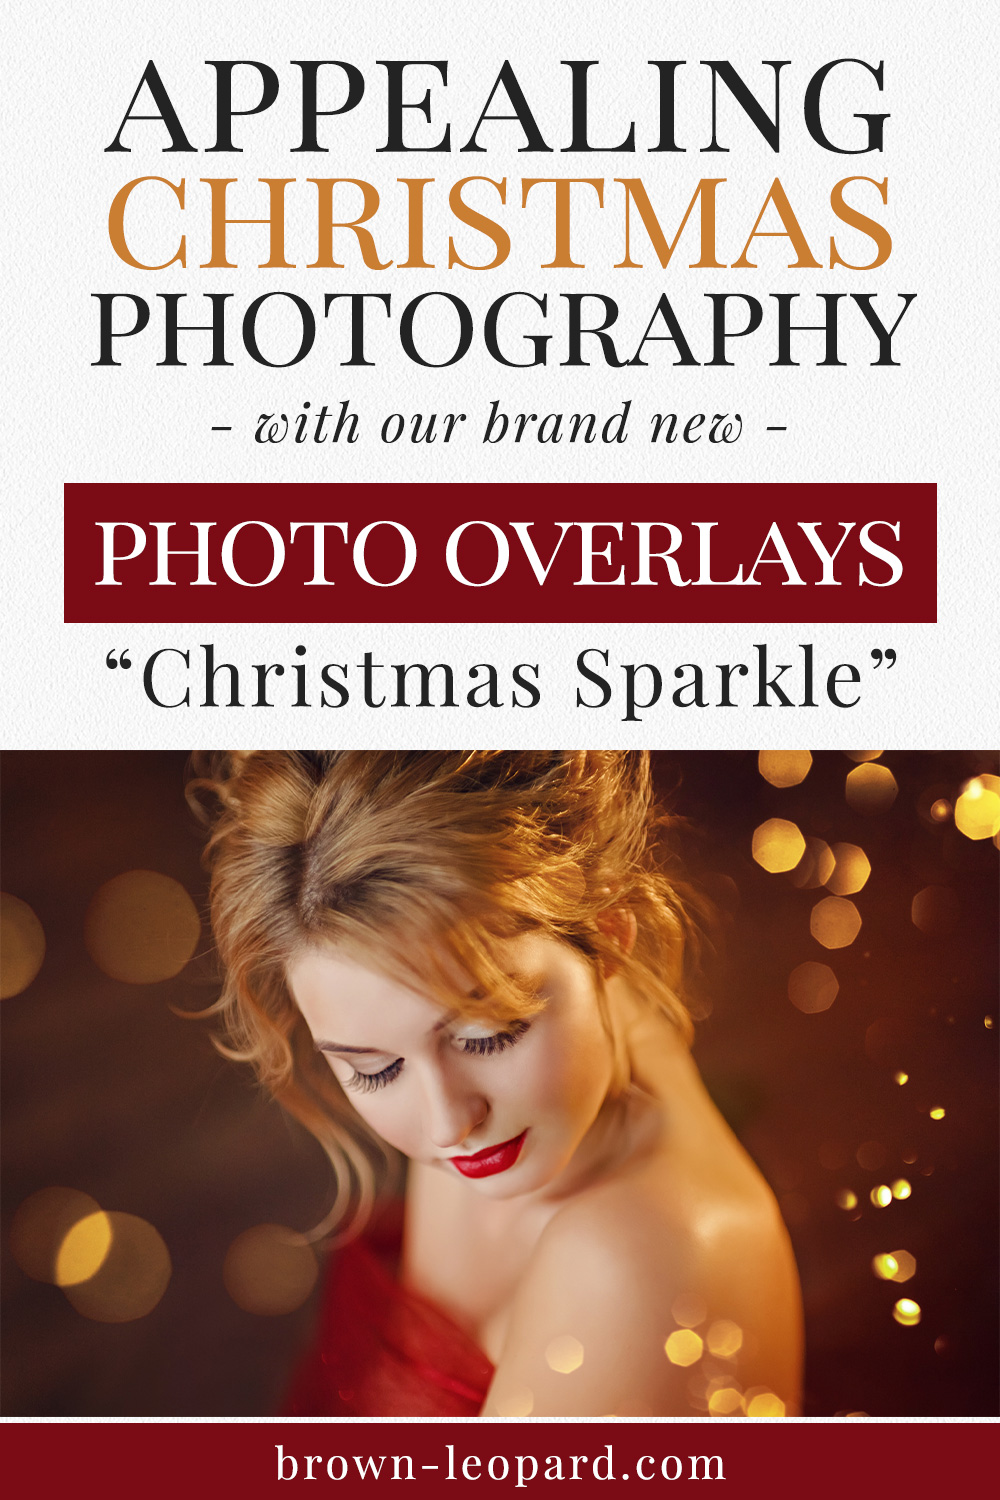 Enhance your Christmas photography! 35 different Christmas sparkle photo overlays. Great for holiday mini sessions, family & kids photography. Drag & drop - very easy to use, quick and simple. Original results just in few seconds. Professional Christmas bokeh photo overlays for Photoshop, PicMoneky, Canva, etc. Photo overlays for creative photographers from Brown Leopard.